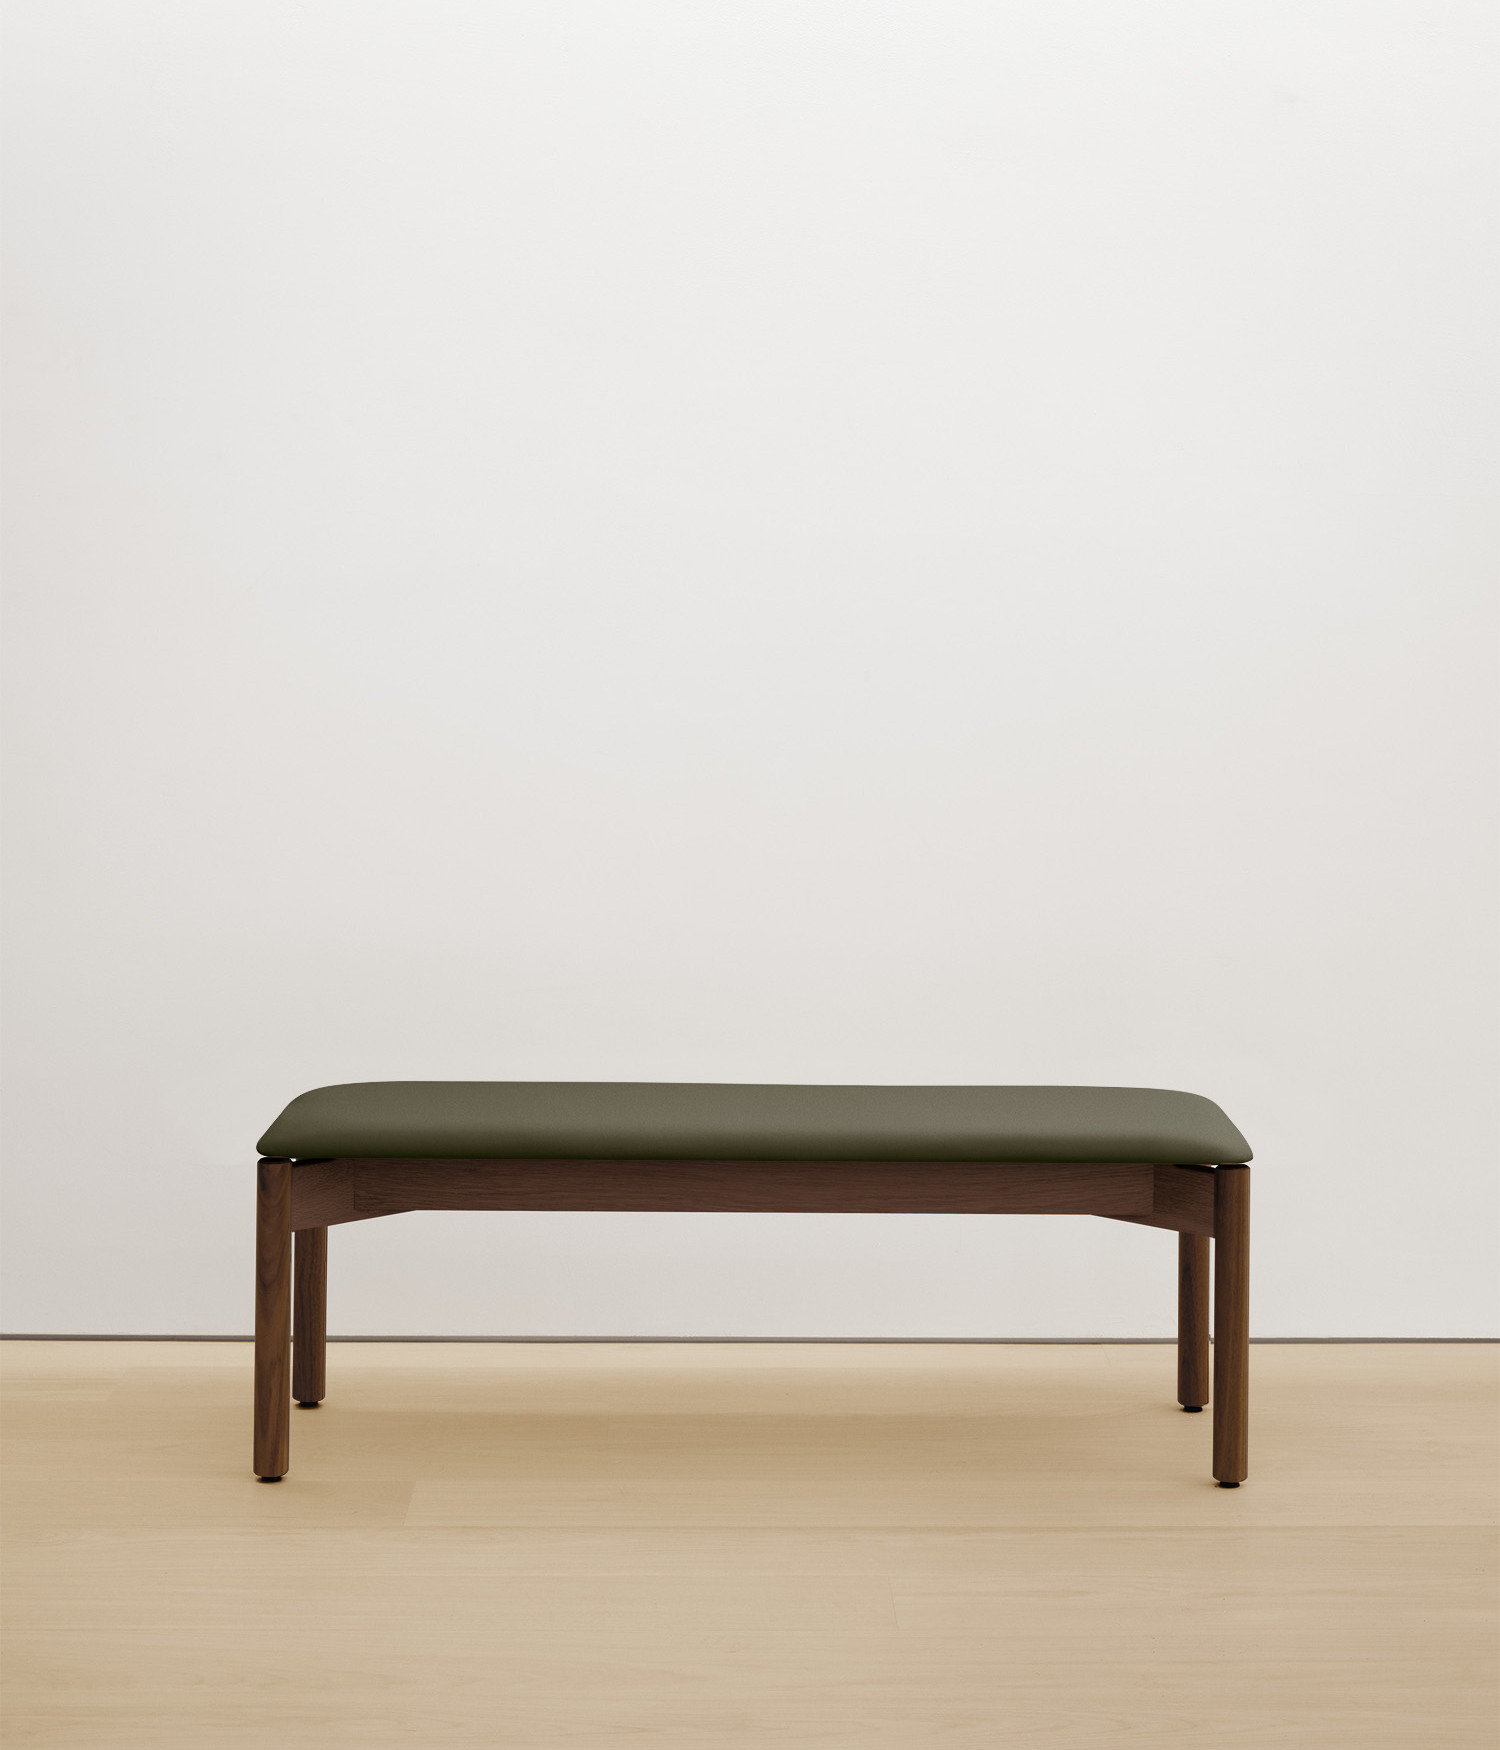  walnut bench with forest color upholstered seat